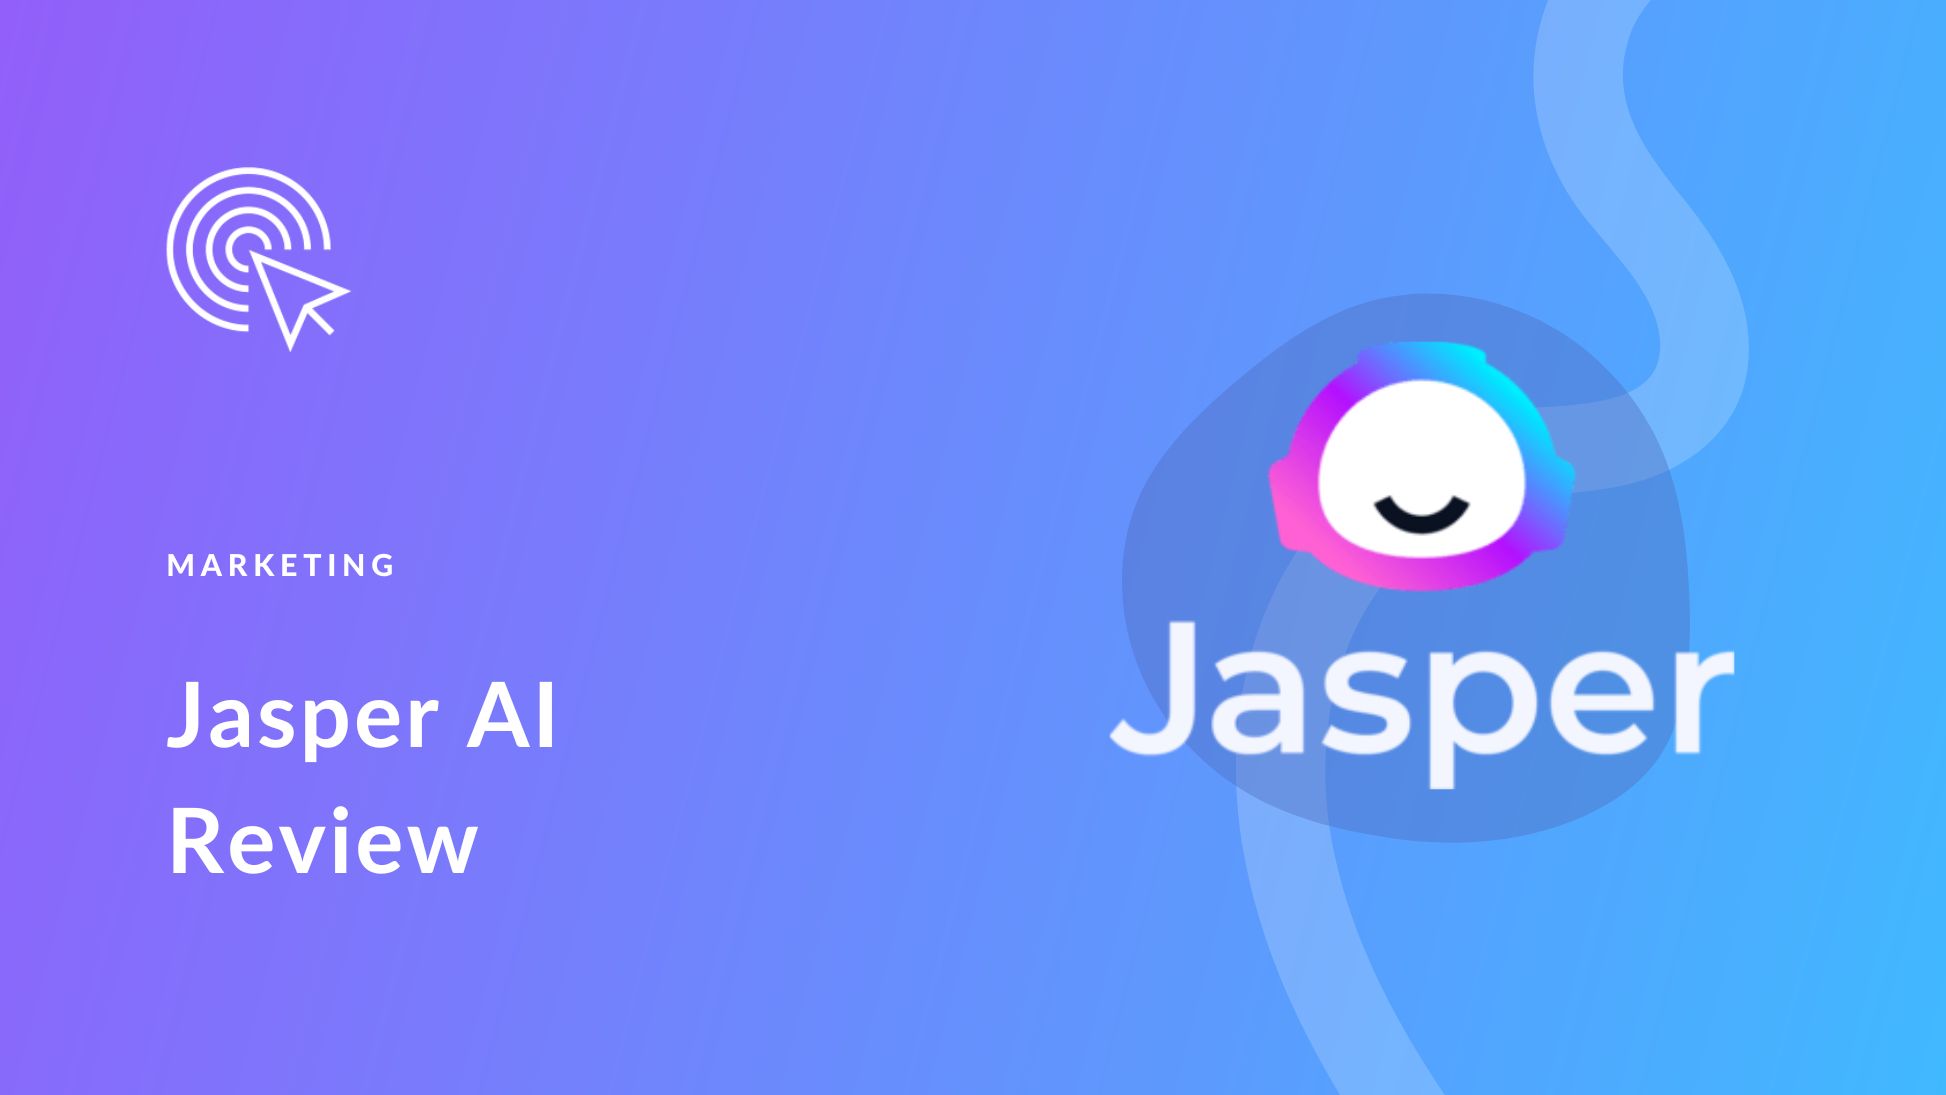 What Are The Main Features Of Jasper AI? Listing The Key Functionalities And Capabilities Of Jasper AI. Jasper AI Features Tools, Functionalities, Components